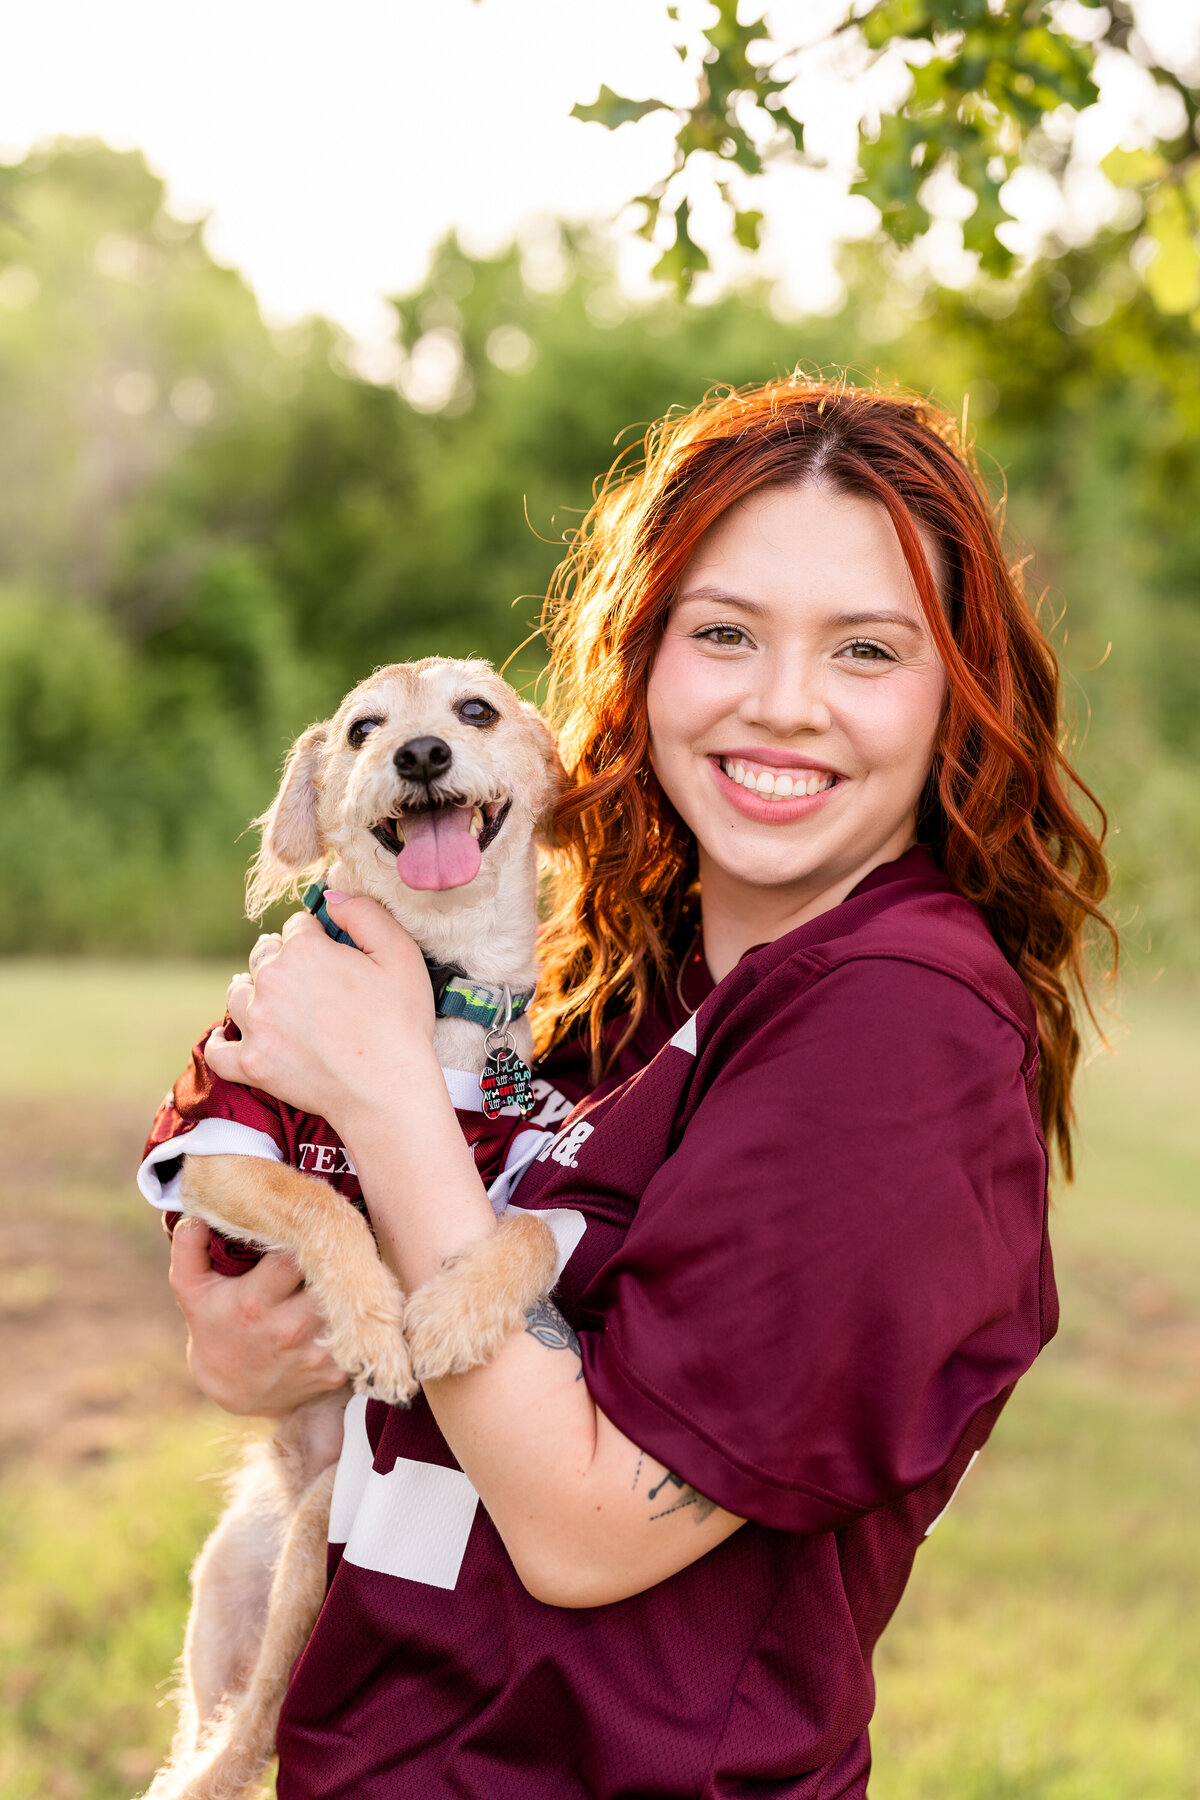 Texas A&M senior girl holding dog and smiling while both wearing maroon jerseys in Leaching Teaching Gardens